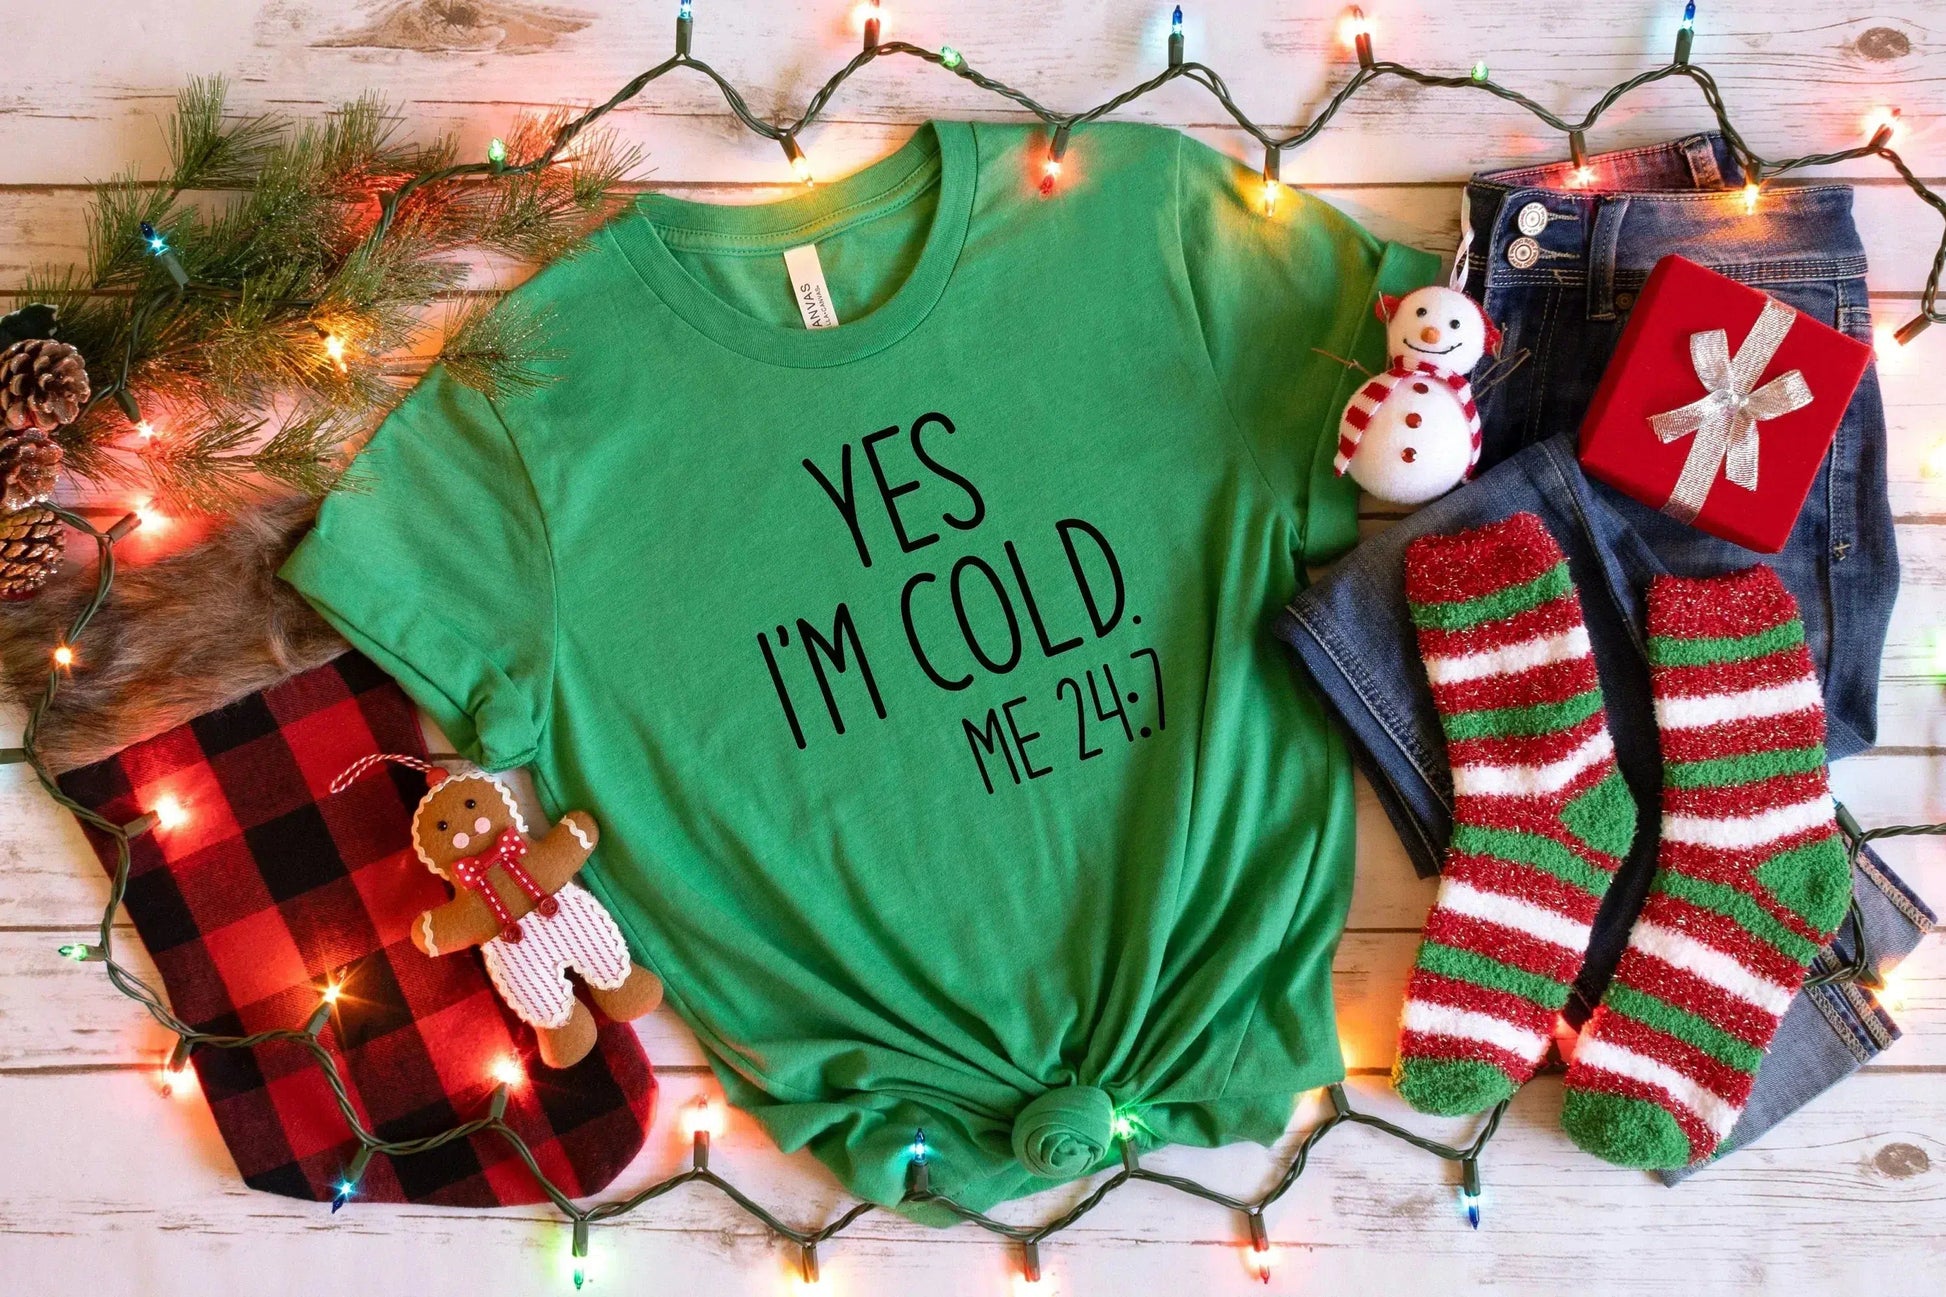 I'm Cold 24/7 Winter Shirt for Women